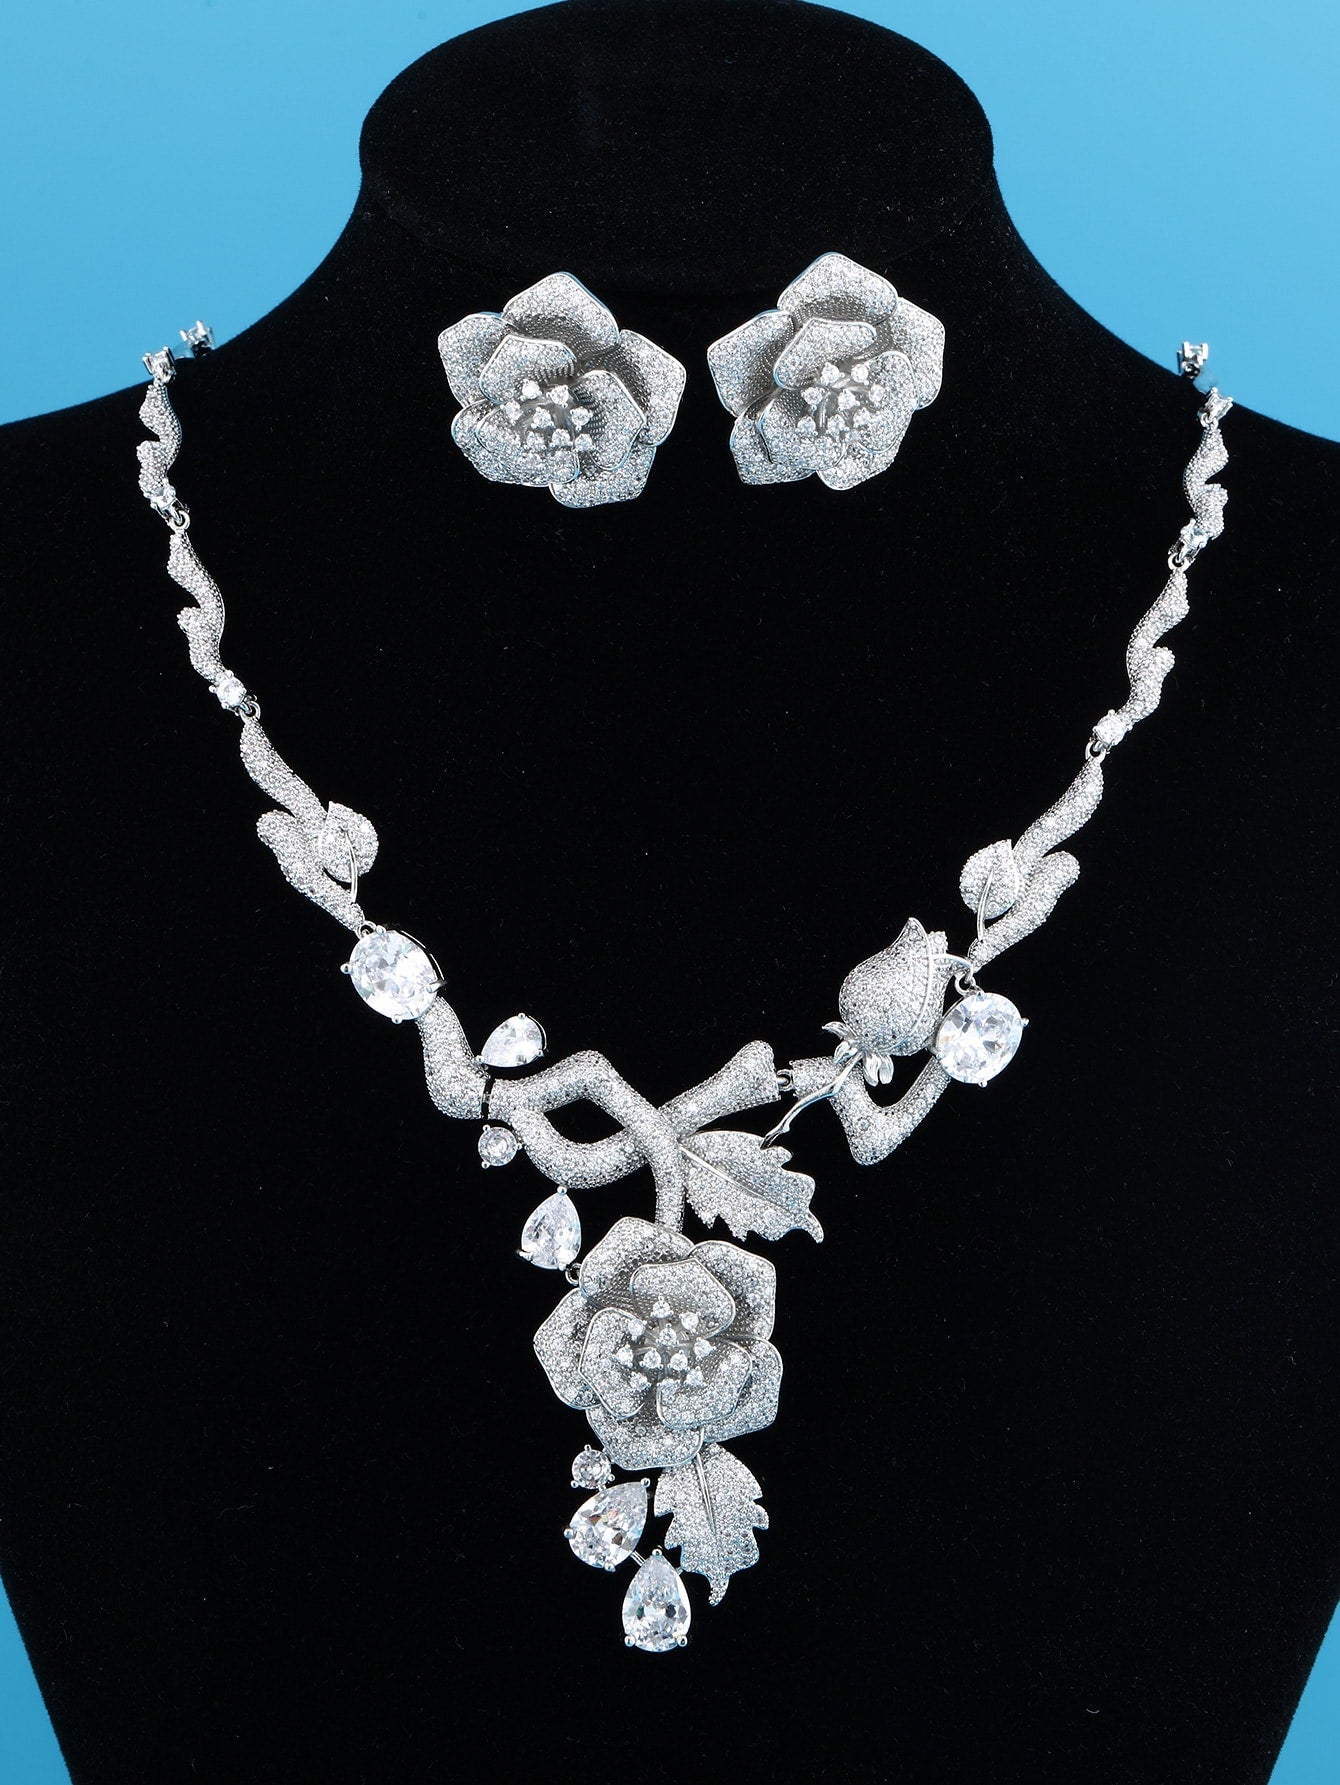 Luxury statement earrings & necklace set - JuVons